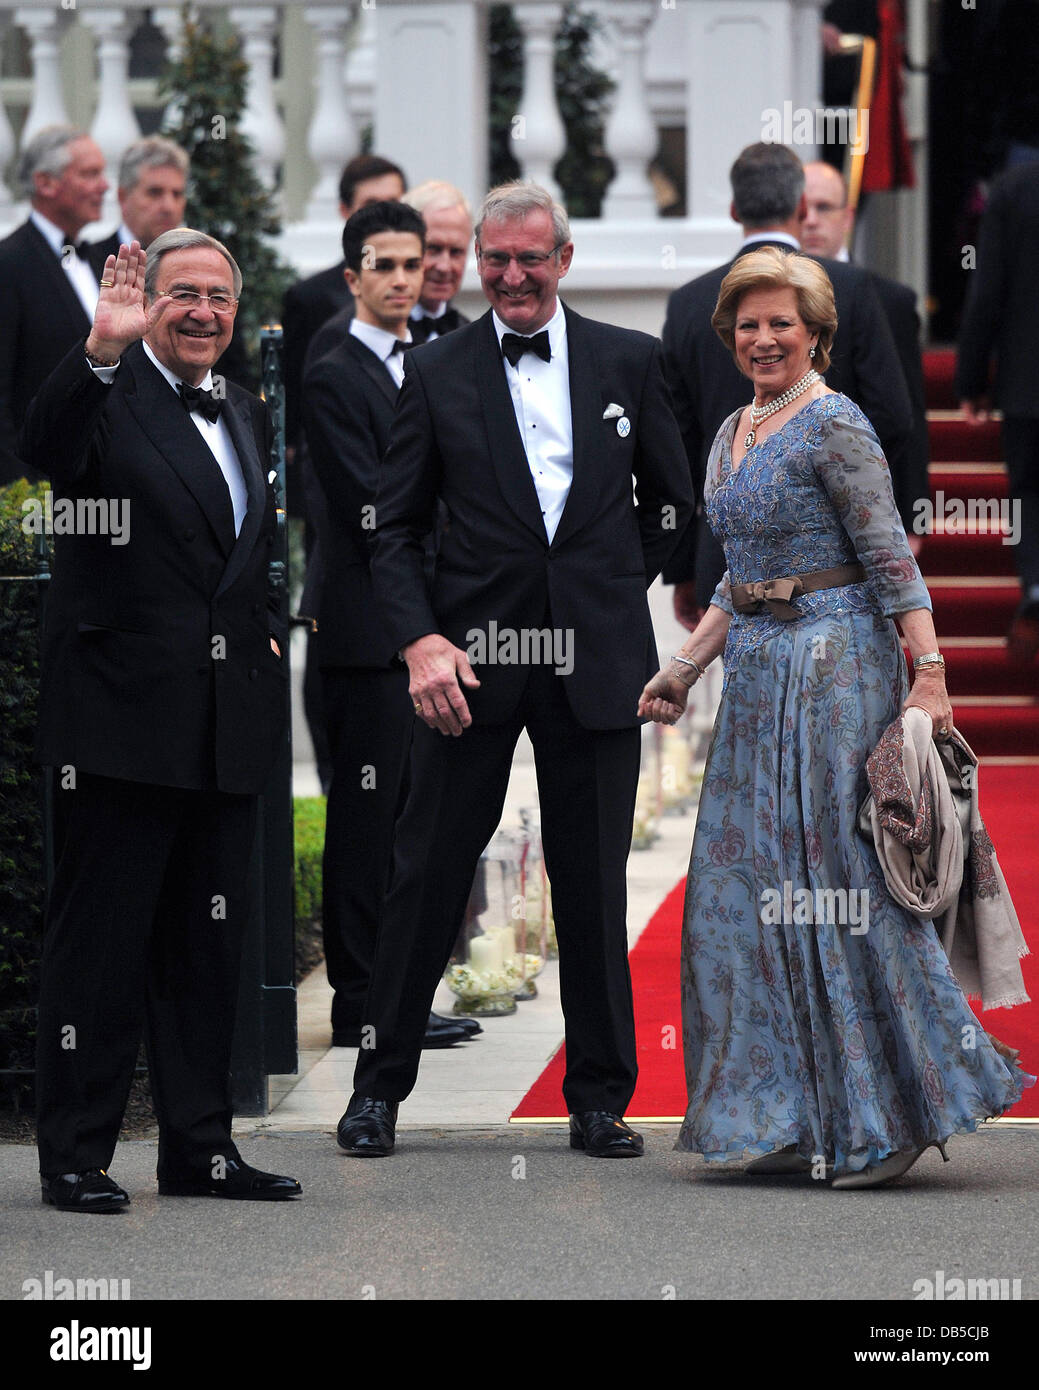 Queen Anne-Marie of Greece (R), King Constantine of Greece (L) Royal Wedding - pre-wedding dinner held at the Mandarin Oriental Hyde Park - Arrivals. London, England - 28.04.11 Stock Photo